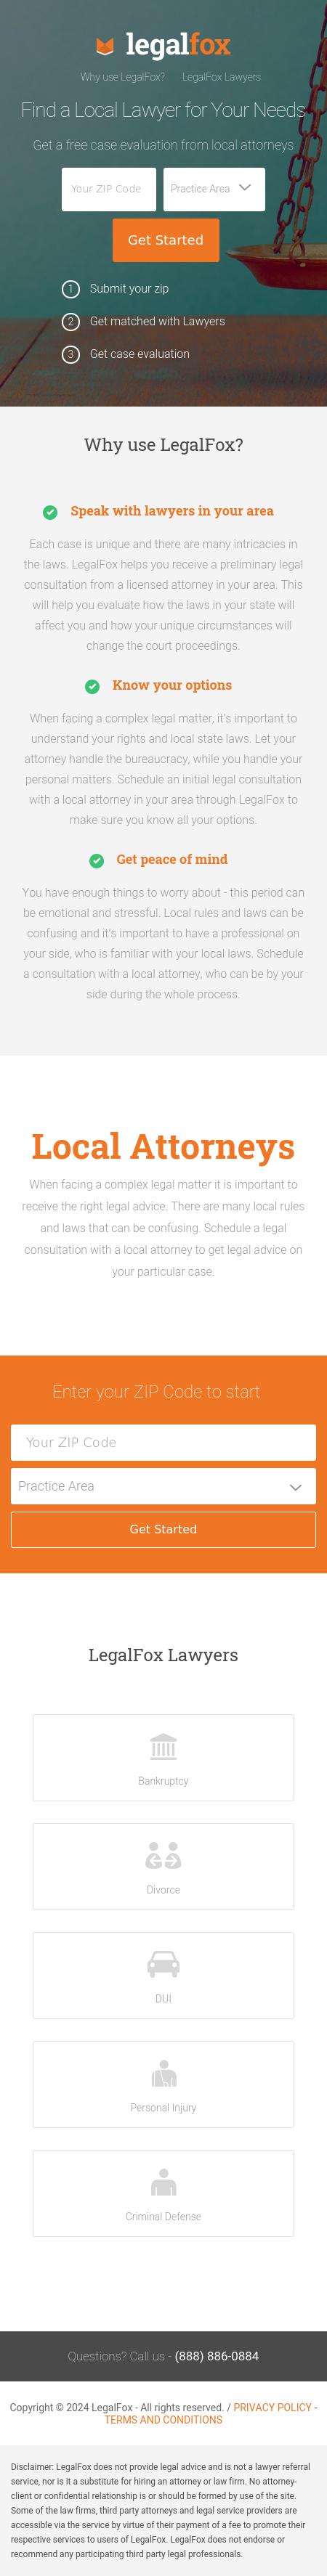 Find a Local Attorney - Morristown NJ Lawyers